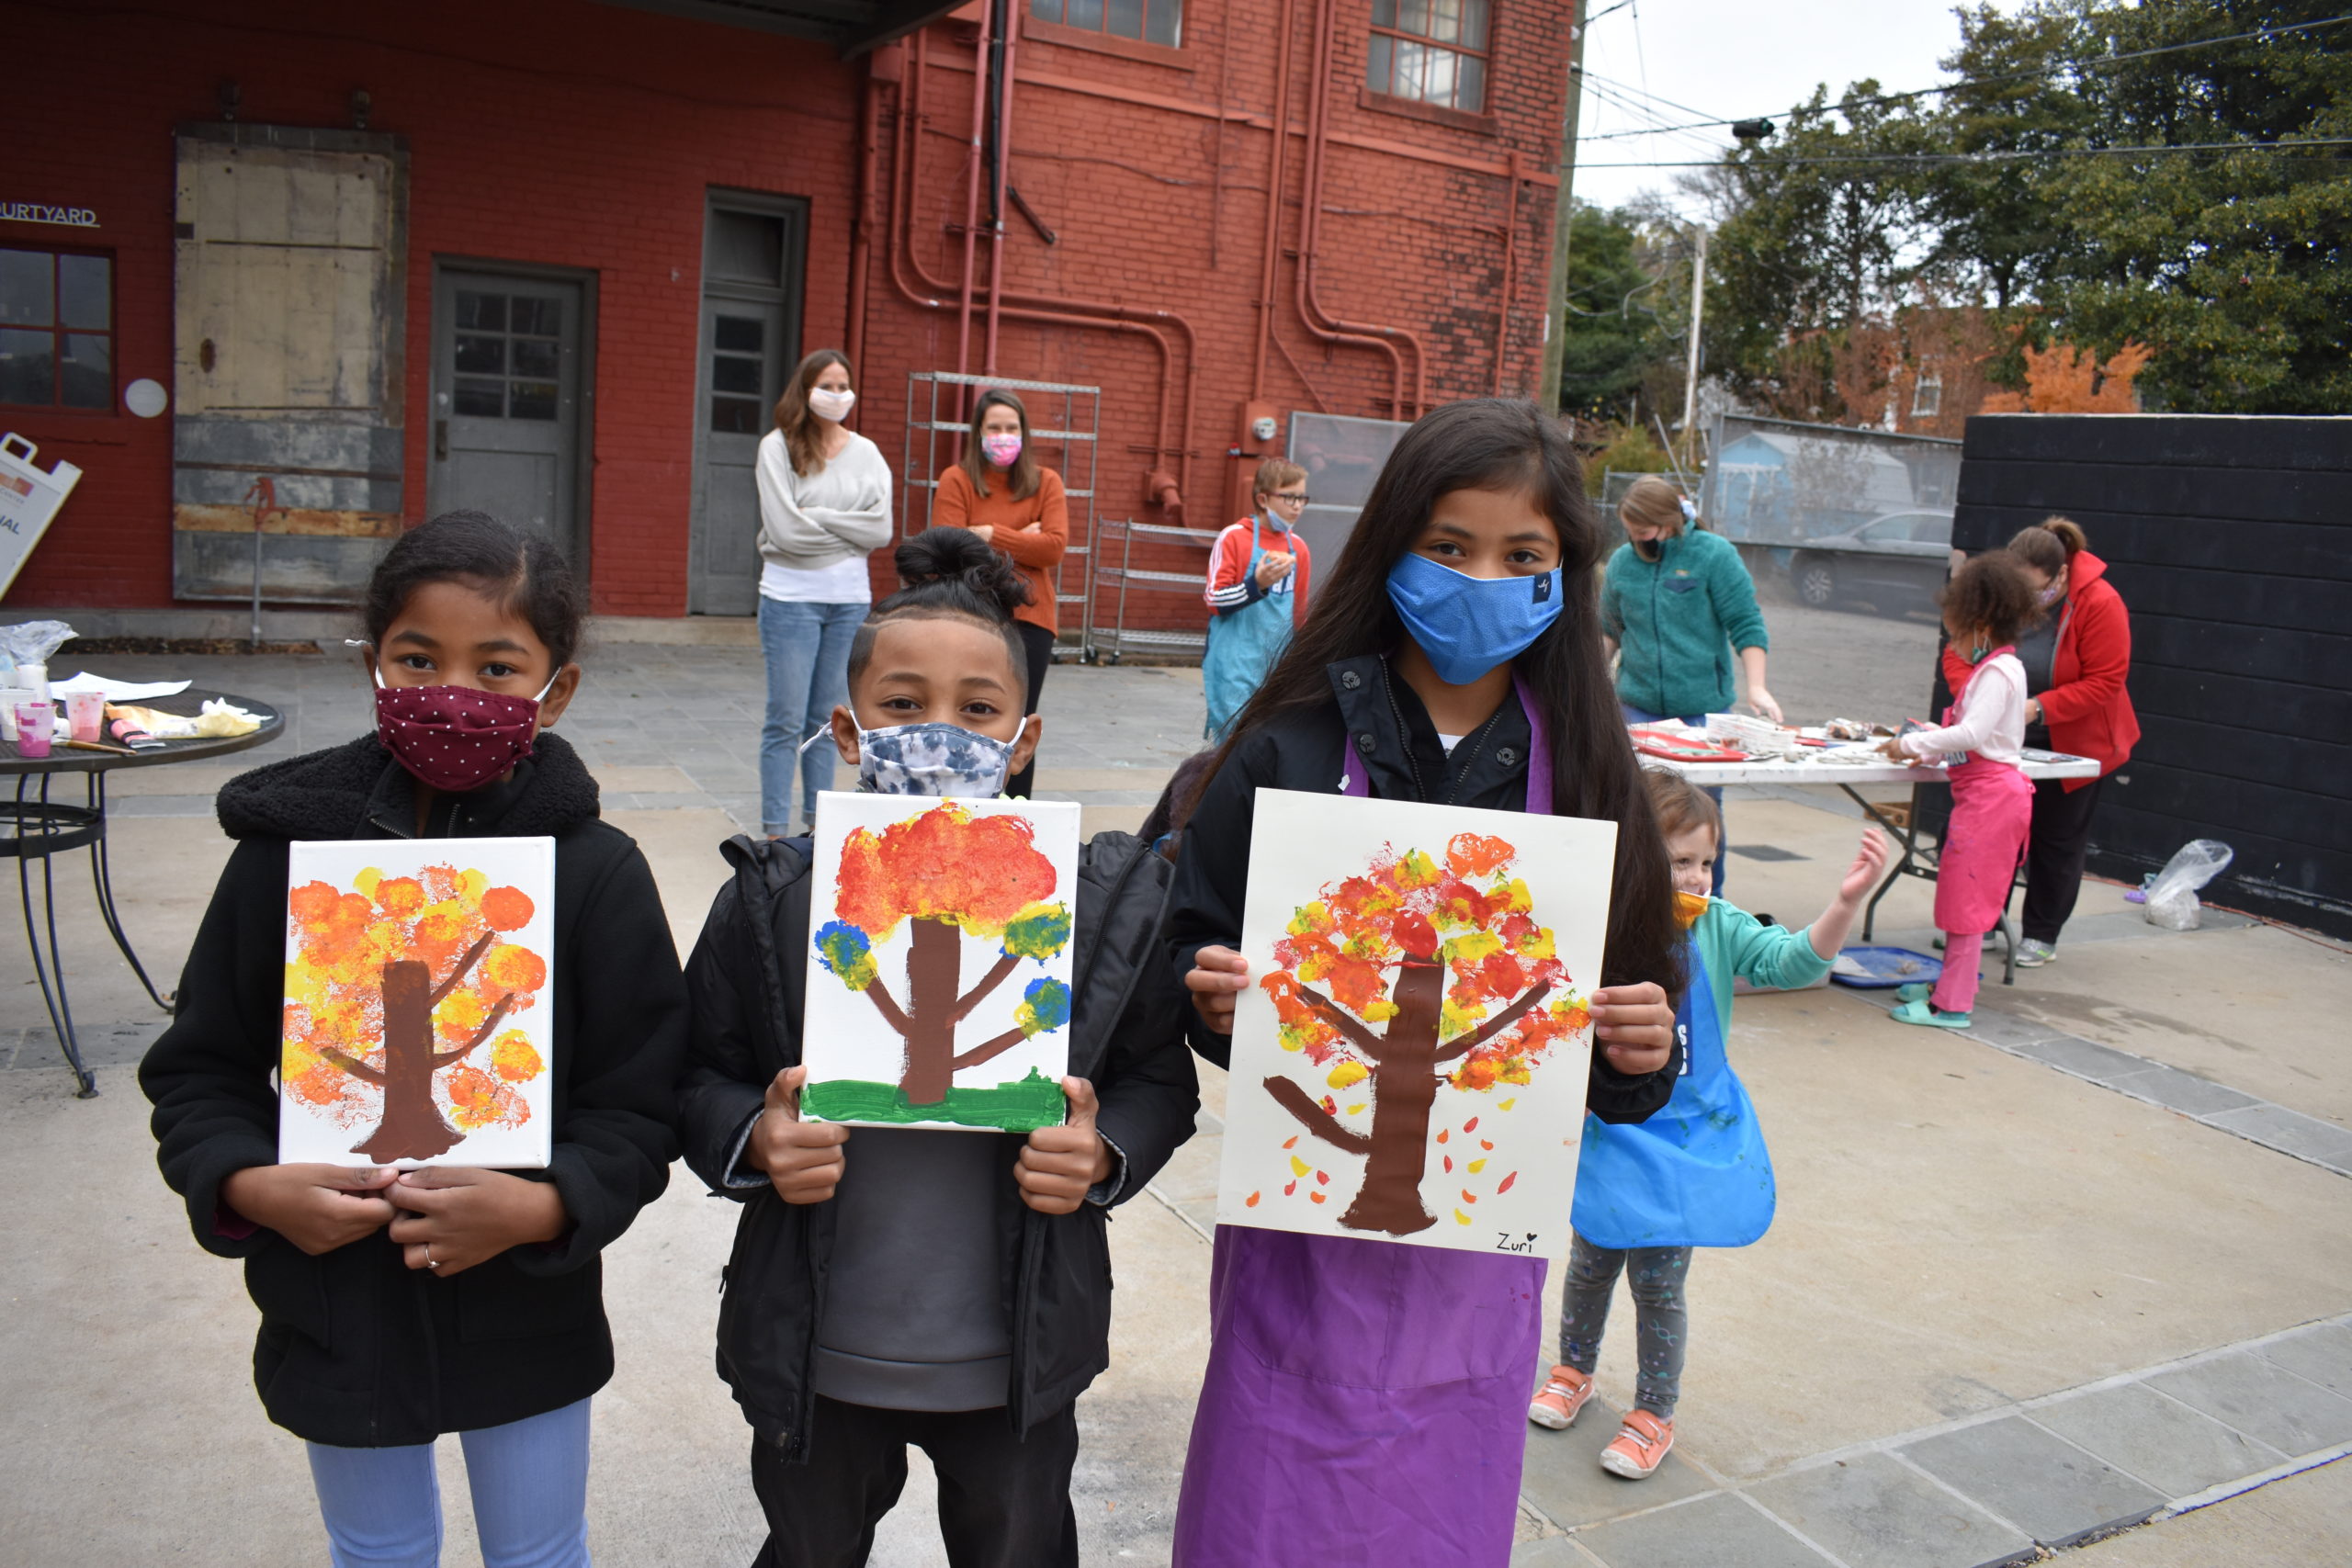 Three children standing in a row holding up paintings of trees